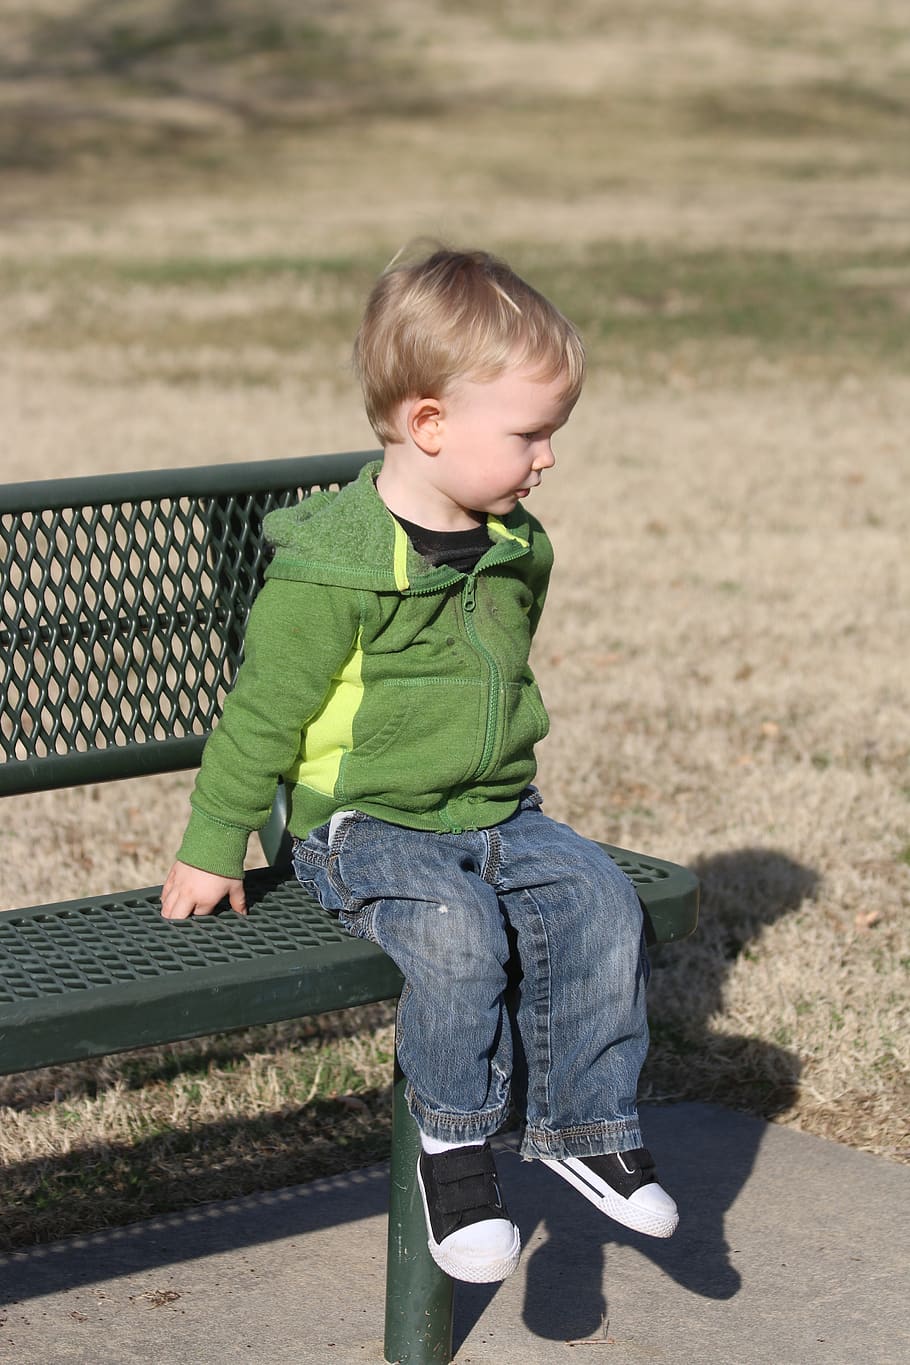 stoic, kid, bench, toddler, alone, childhood, full length, one person